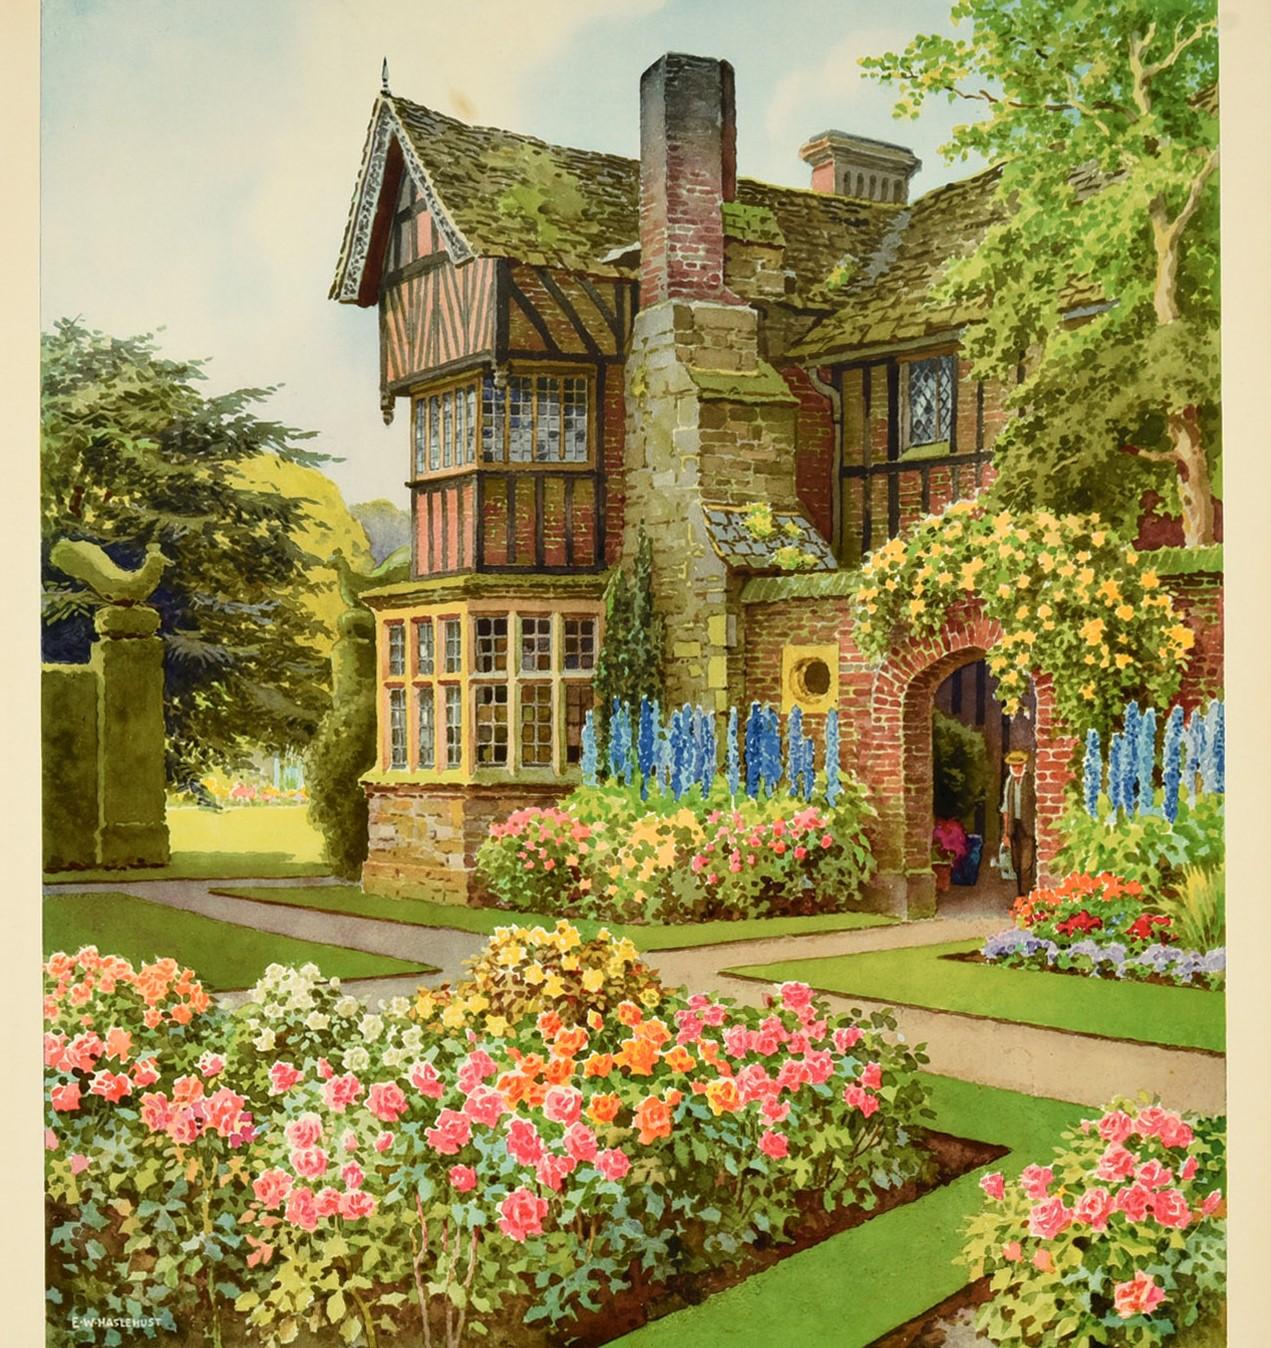 Original vintage travel poster - Britain in Summer - featuring a great image by the watercolour painter Ernest W. Haslehust (1866-1949) of a traditional English country manor house with colourful flower beds in a neatly landscaped garden with shaped